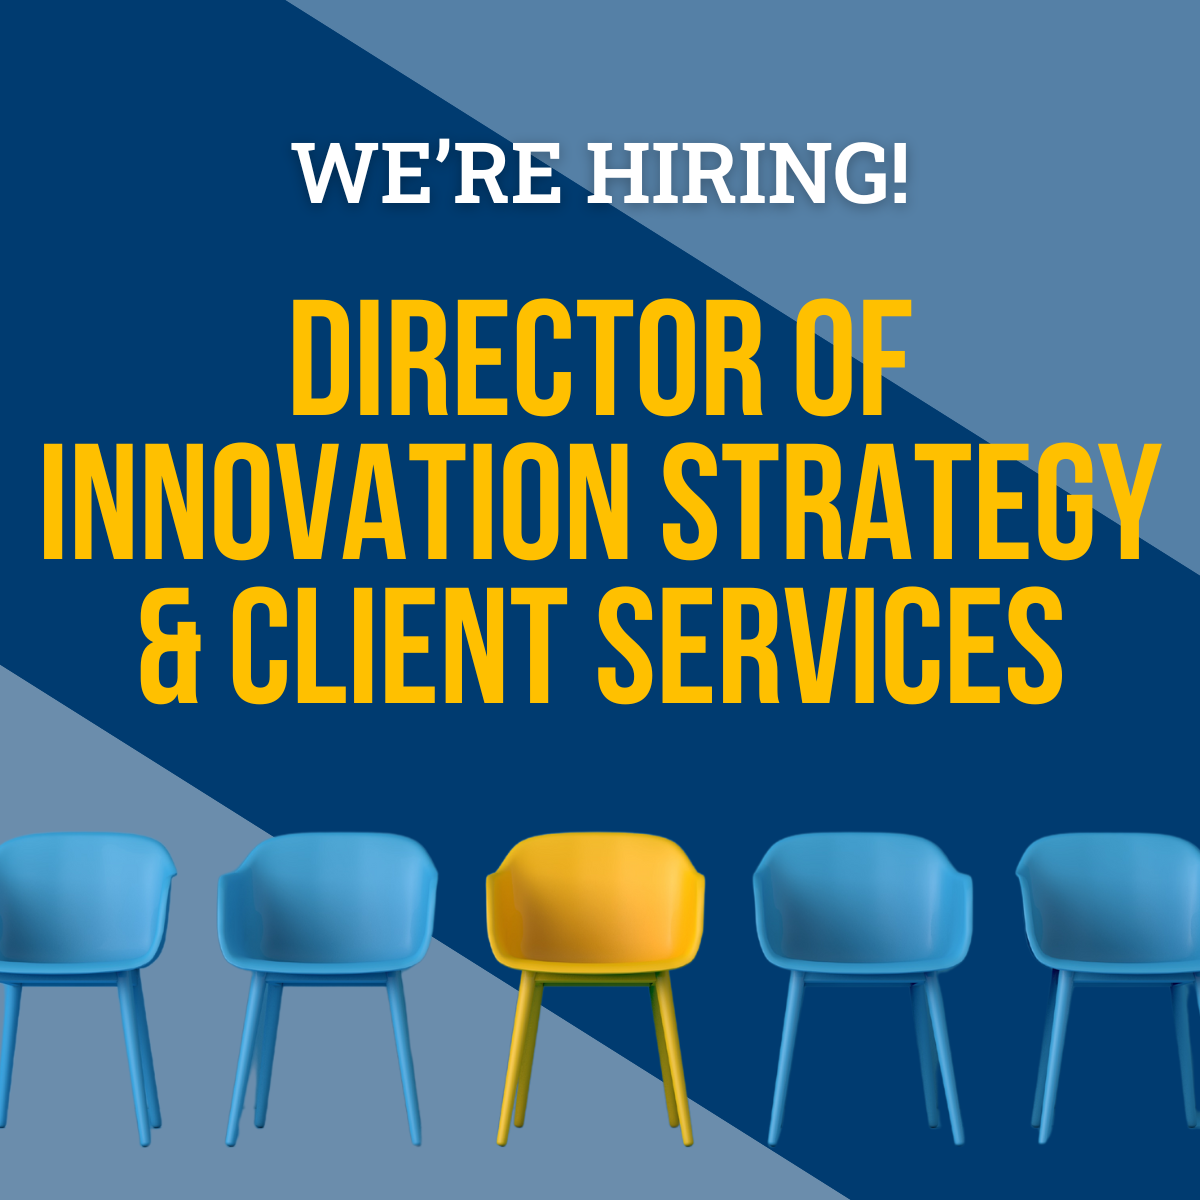 Director of Innovation Strategy & Client Services